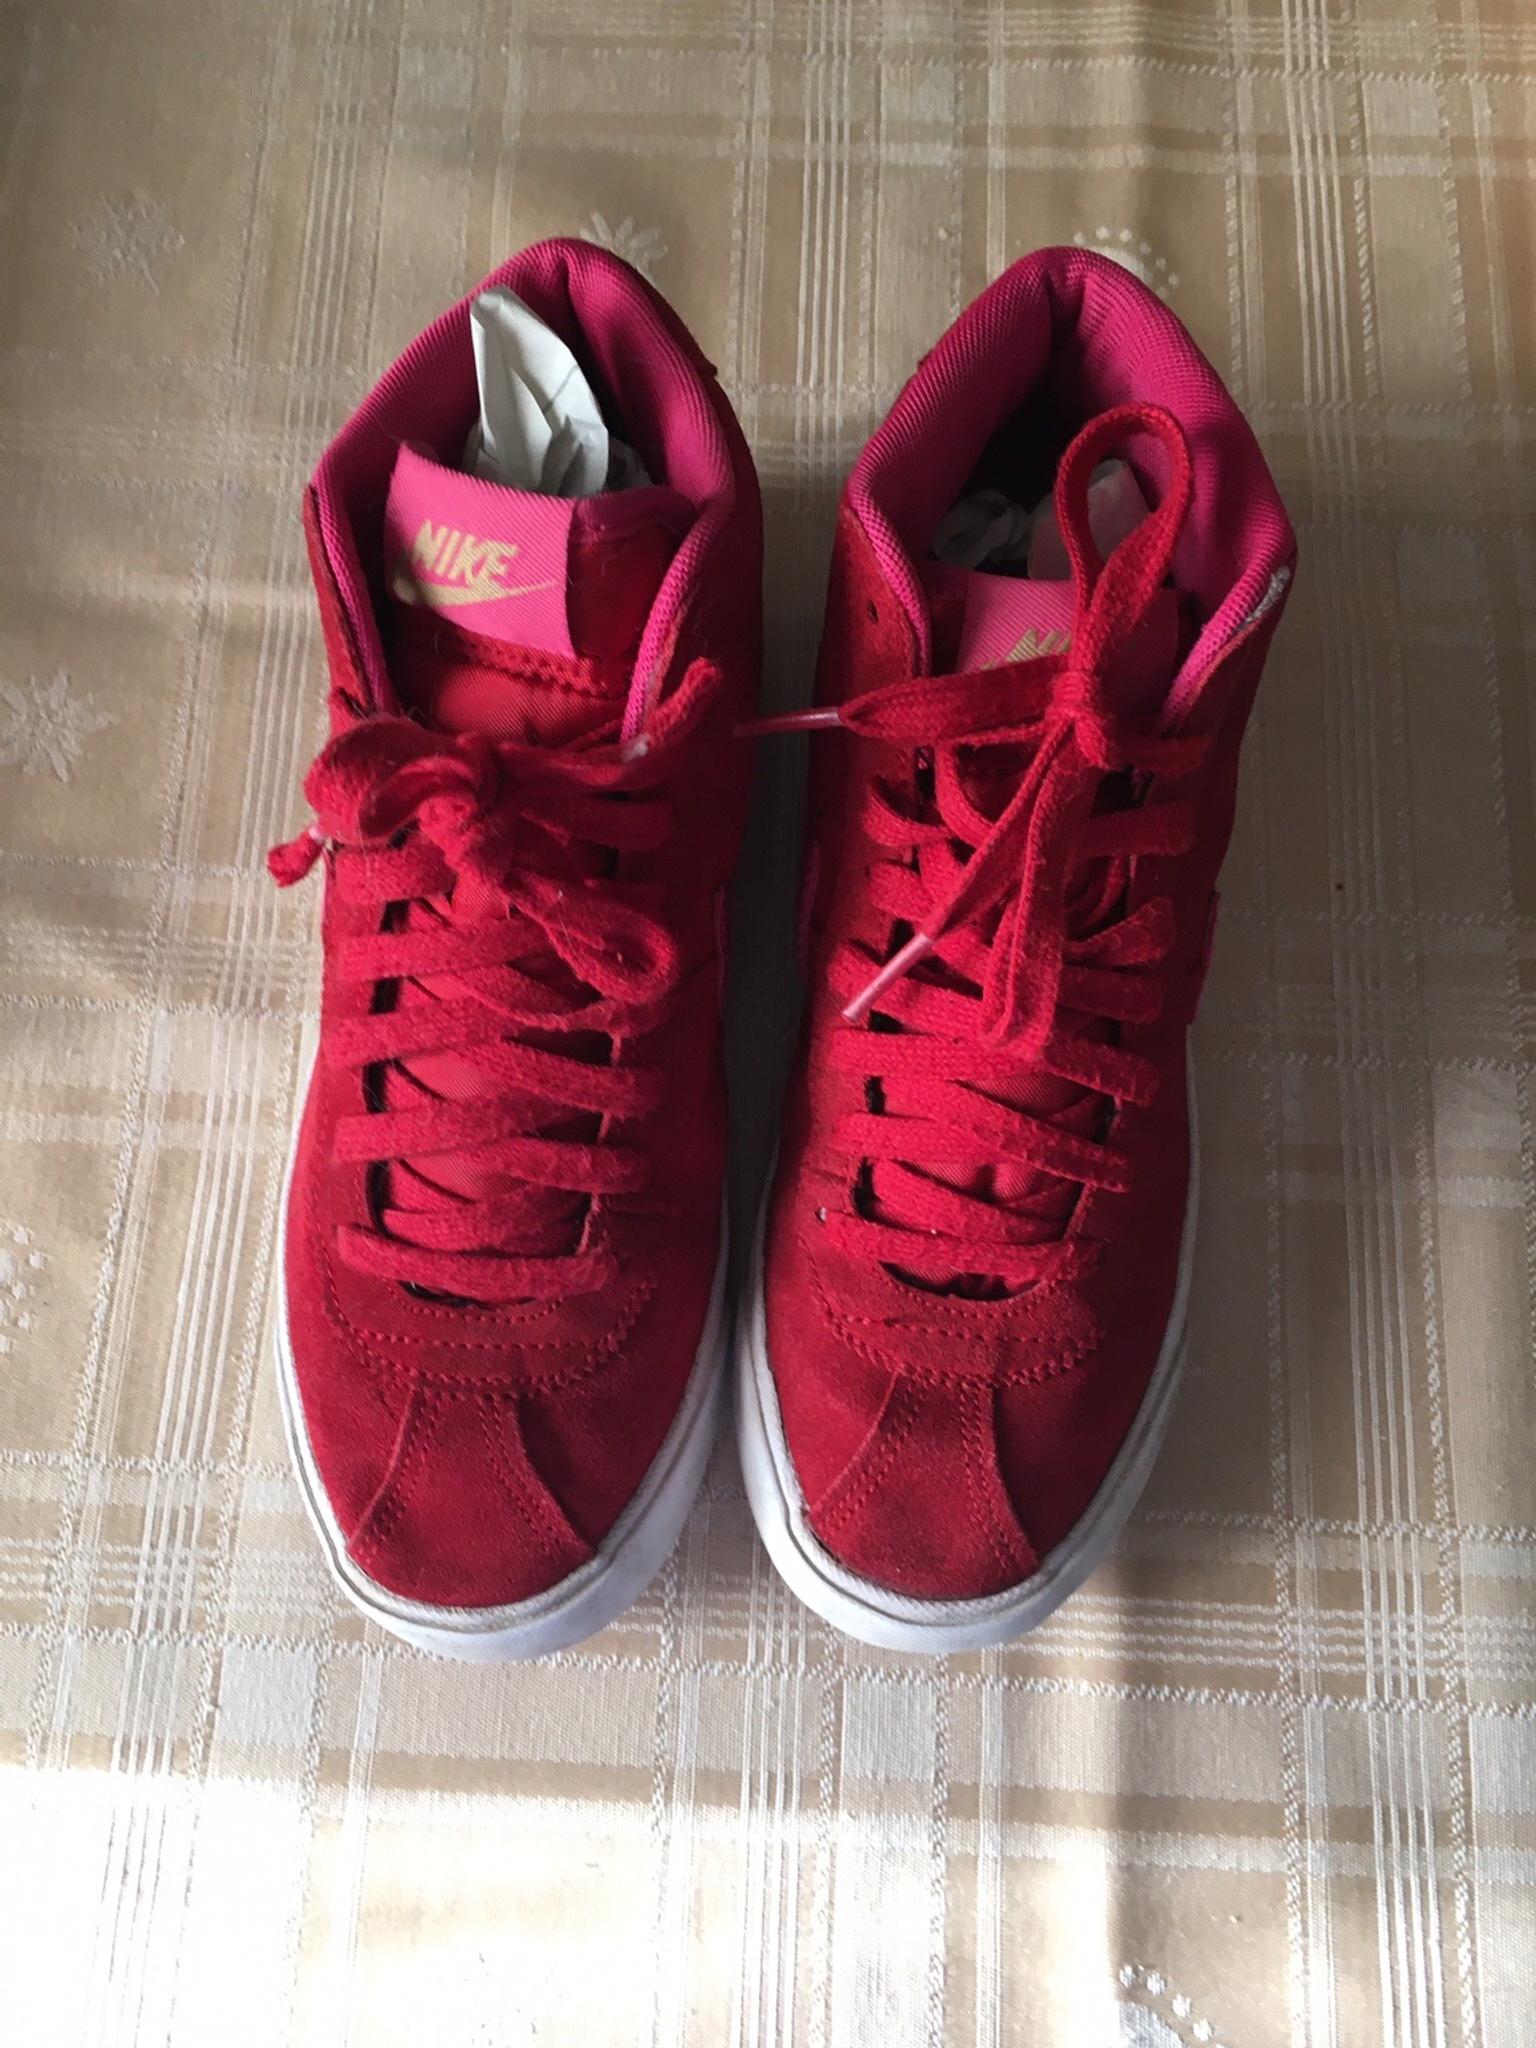 Sneakers scarpe Nike 35/36 in 20161 Cusano for €5.00 for sale | Shpock